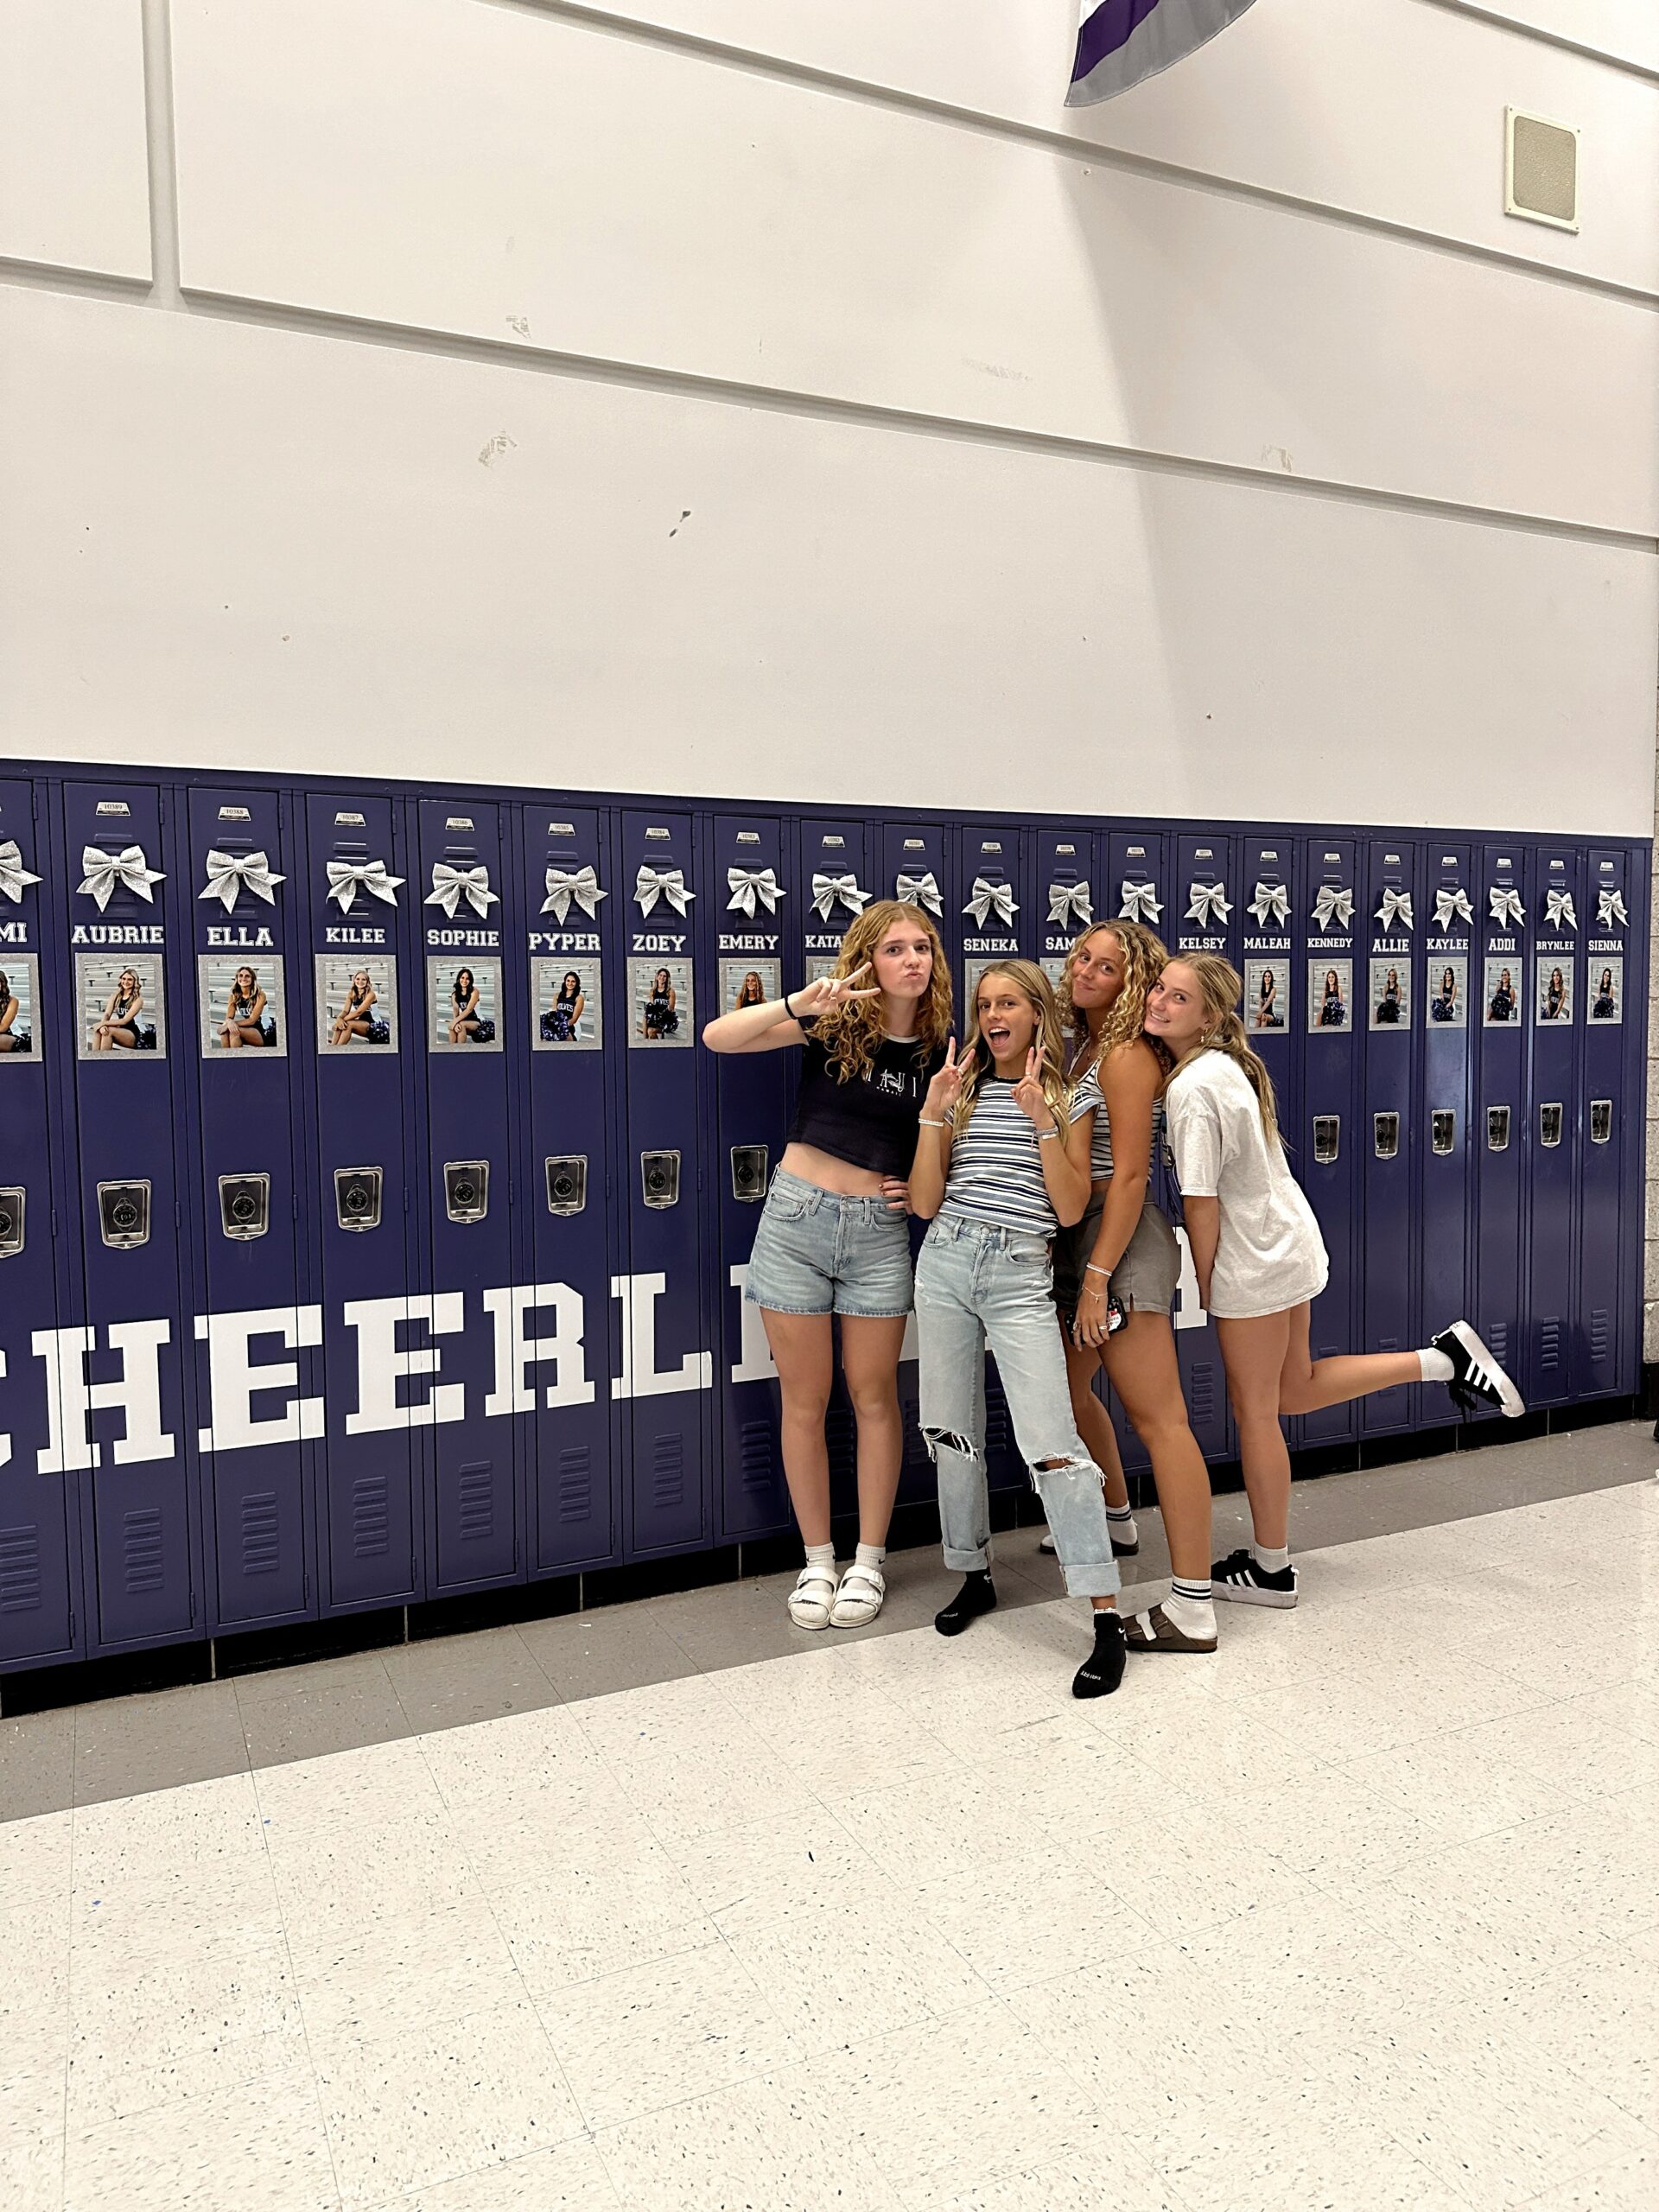 diane talley recommends cheer locker decorations pic